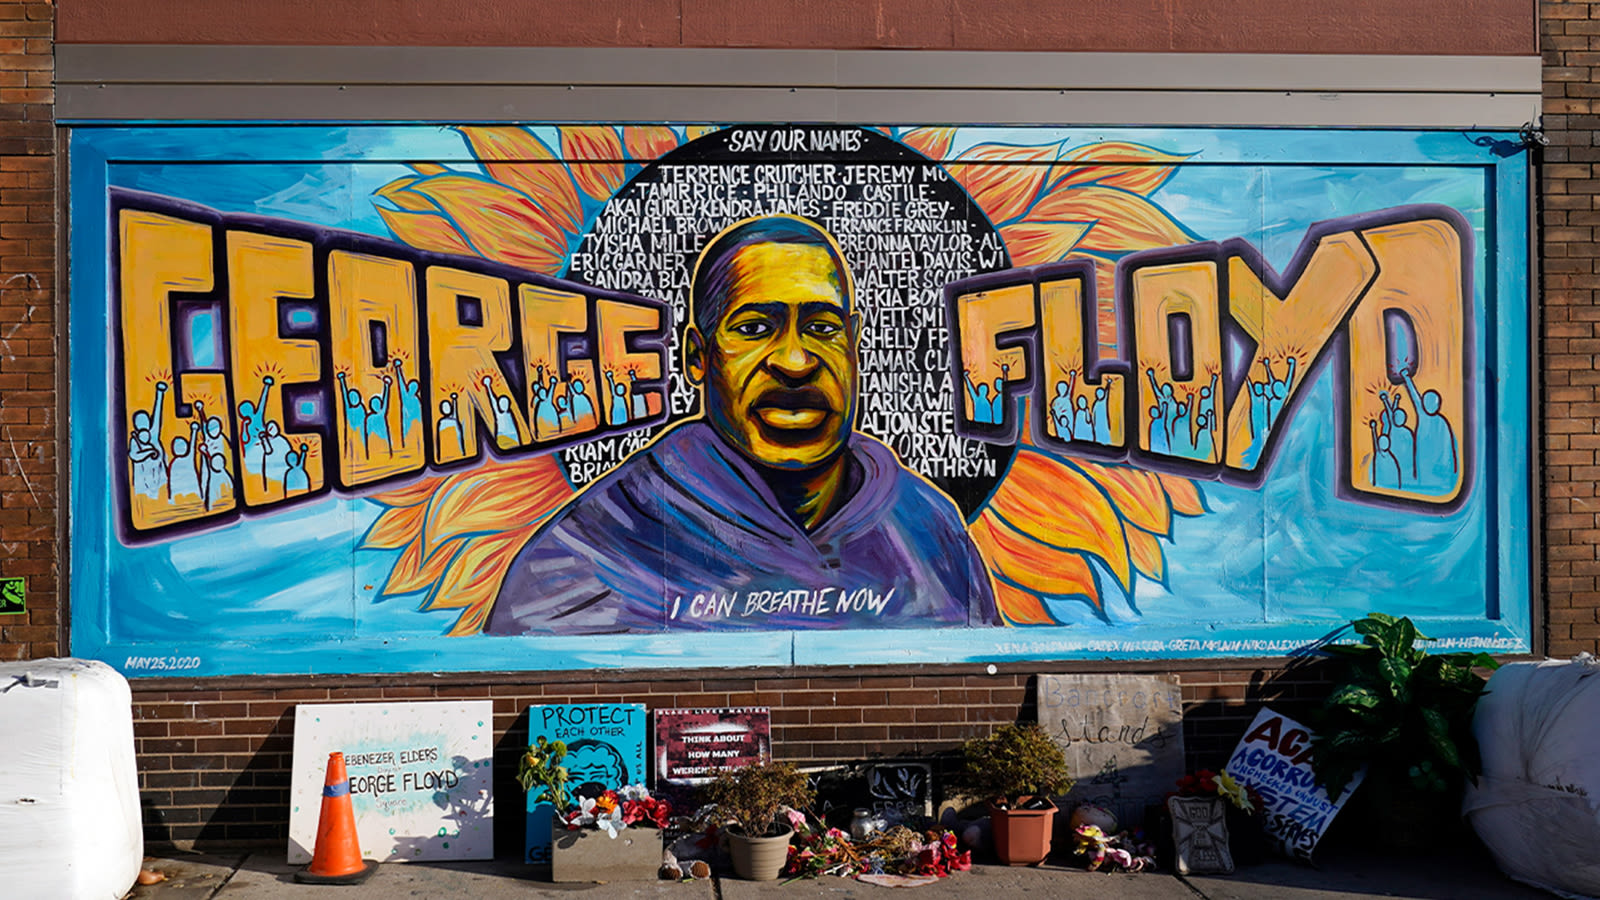 George Floyd's family calls on Congress to pass police reform, 4 years after his murder